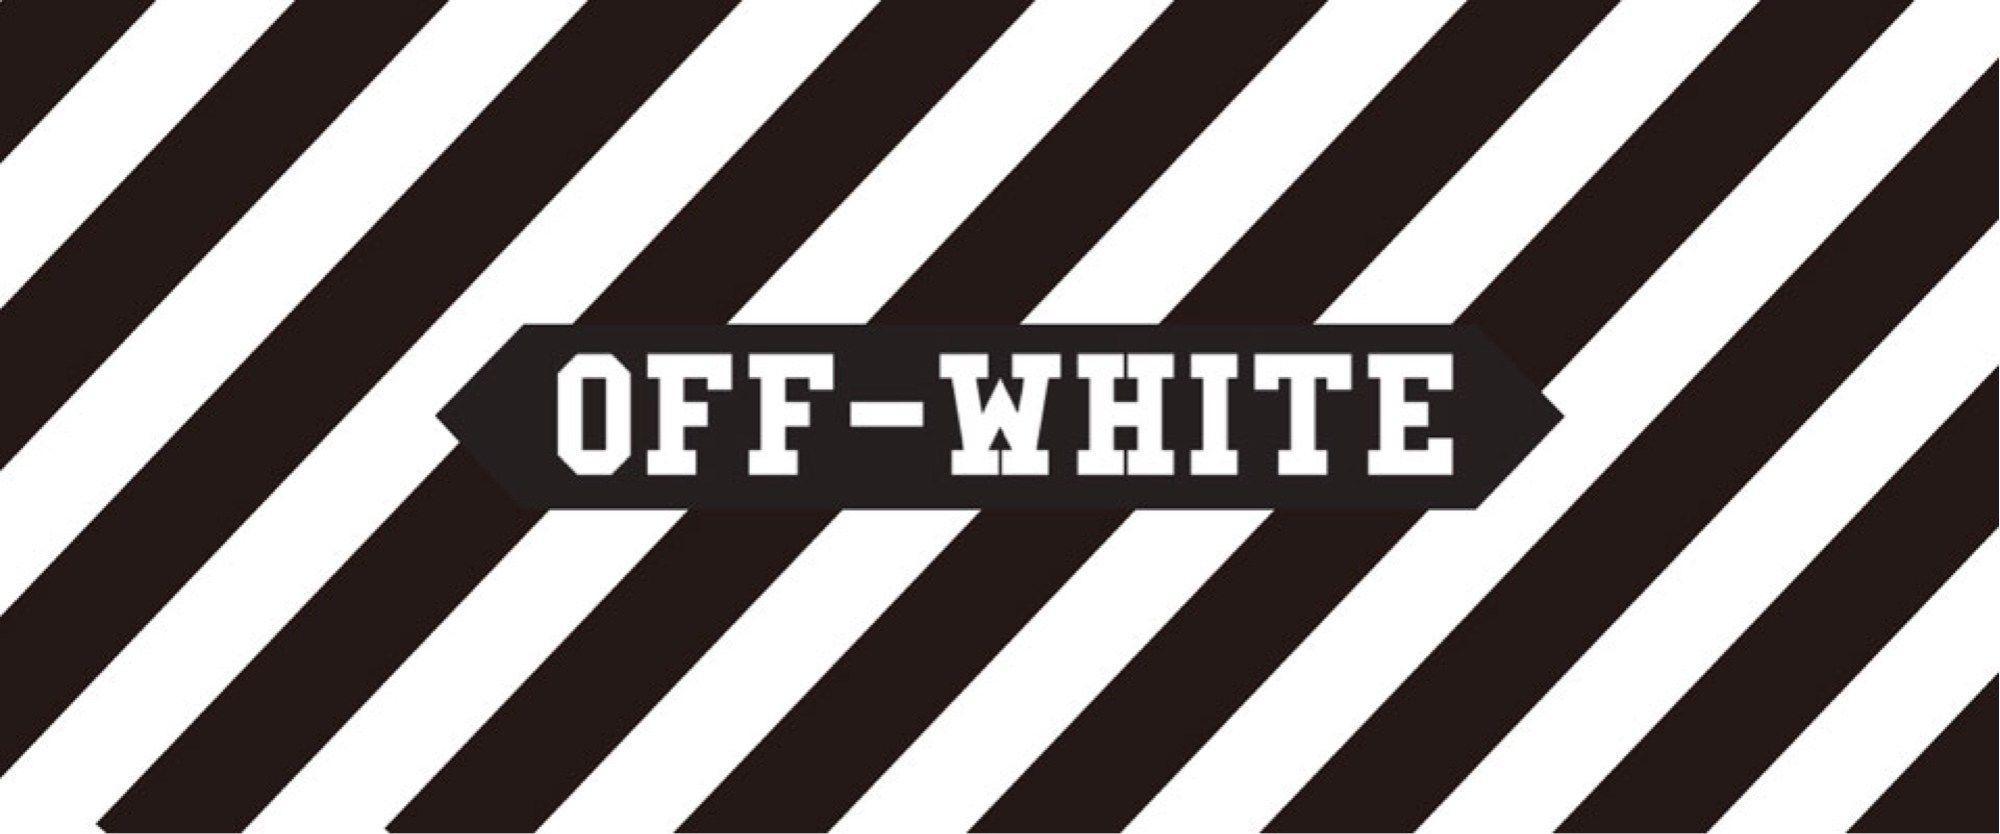 2000 x 834 · jpeg - Off White Computer Wallpapers - Wallpaper Cave